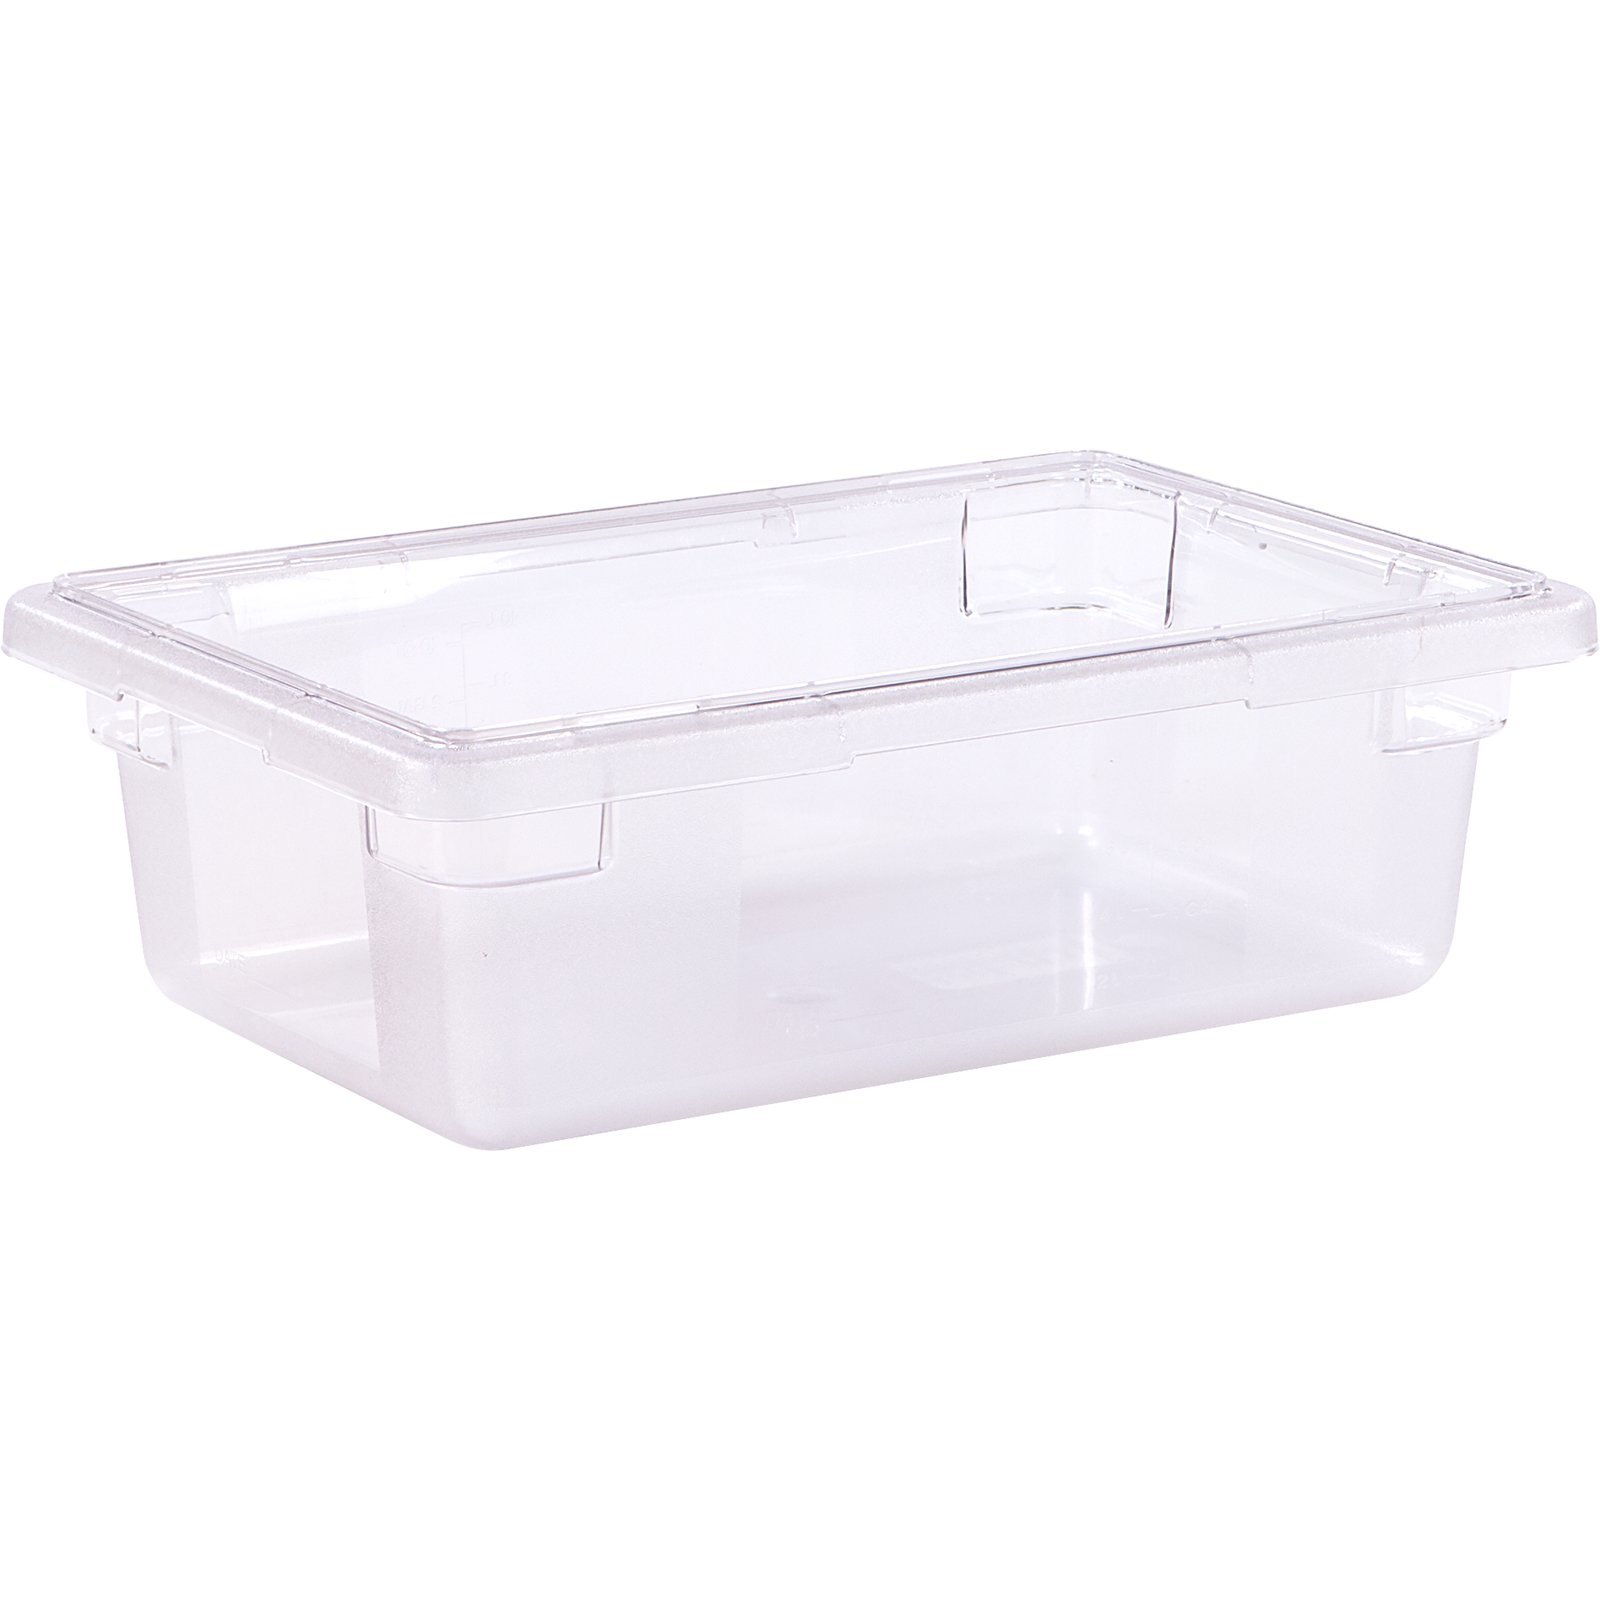 Modestly Priced Premium 3 COMPARTMENT SNACK CUBE CLEAR 1056/CS, snack  compartment containers 